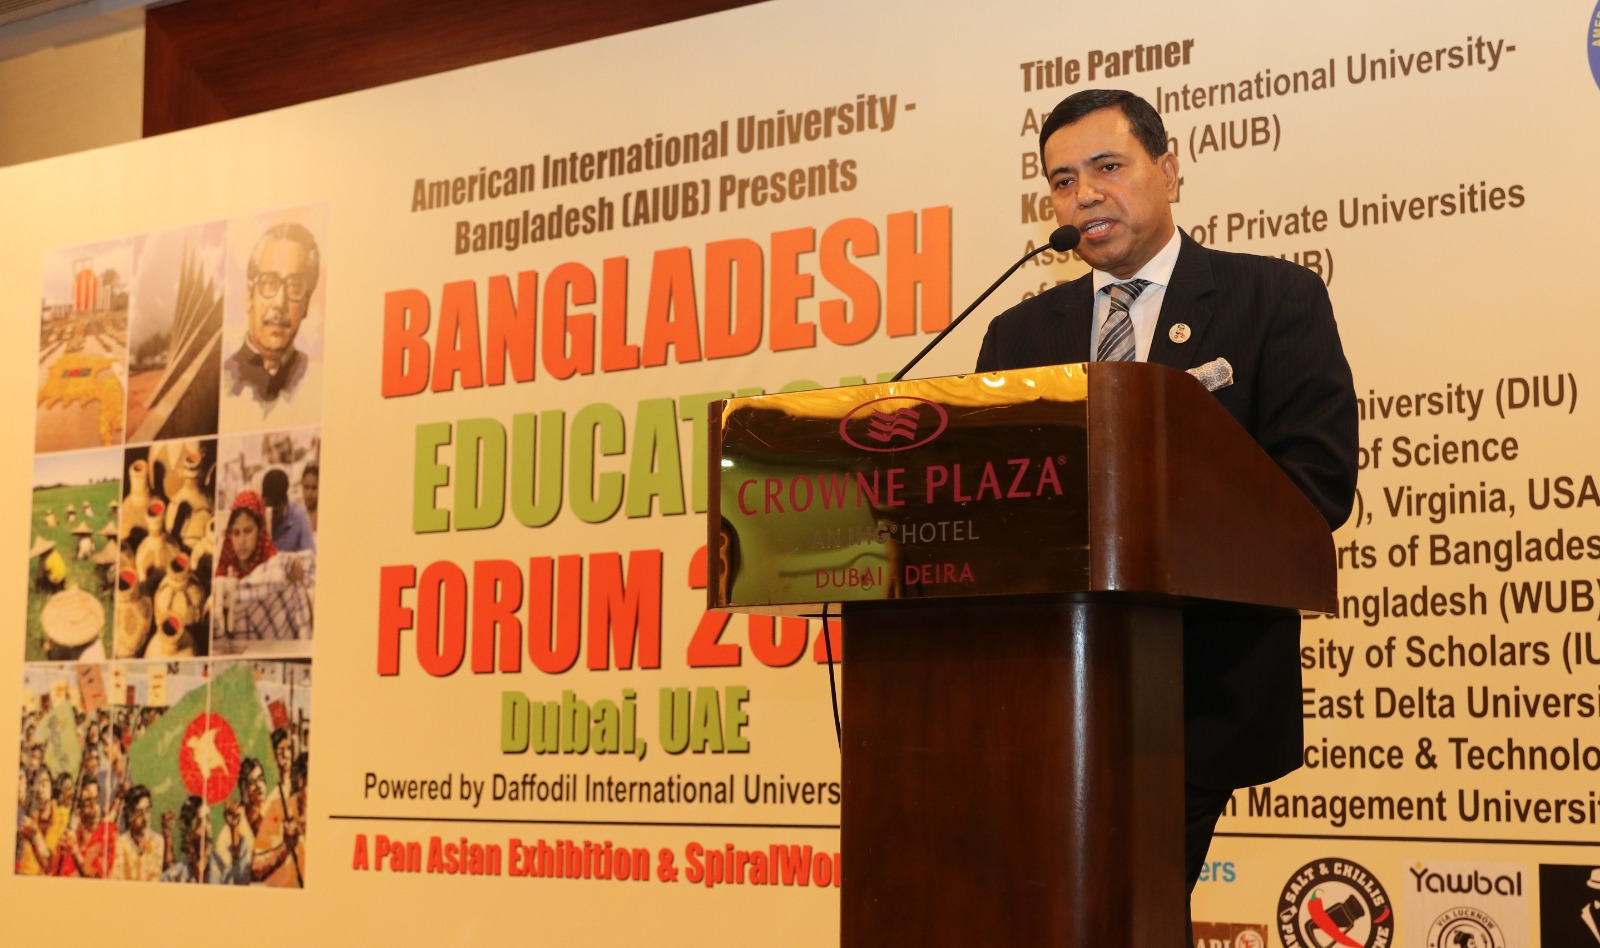 Bangladeshi universities to open campuses in the UAE, officials said at ...